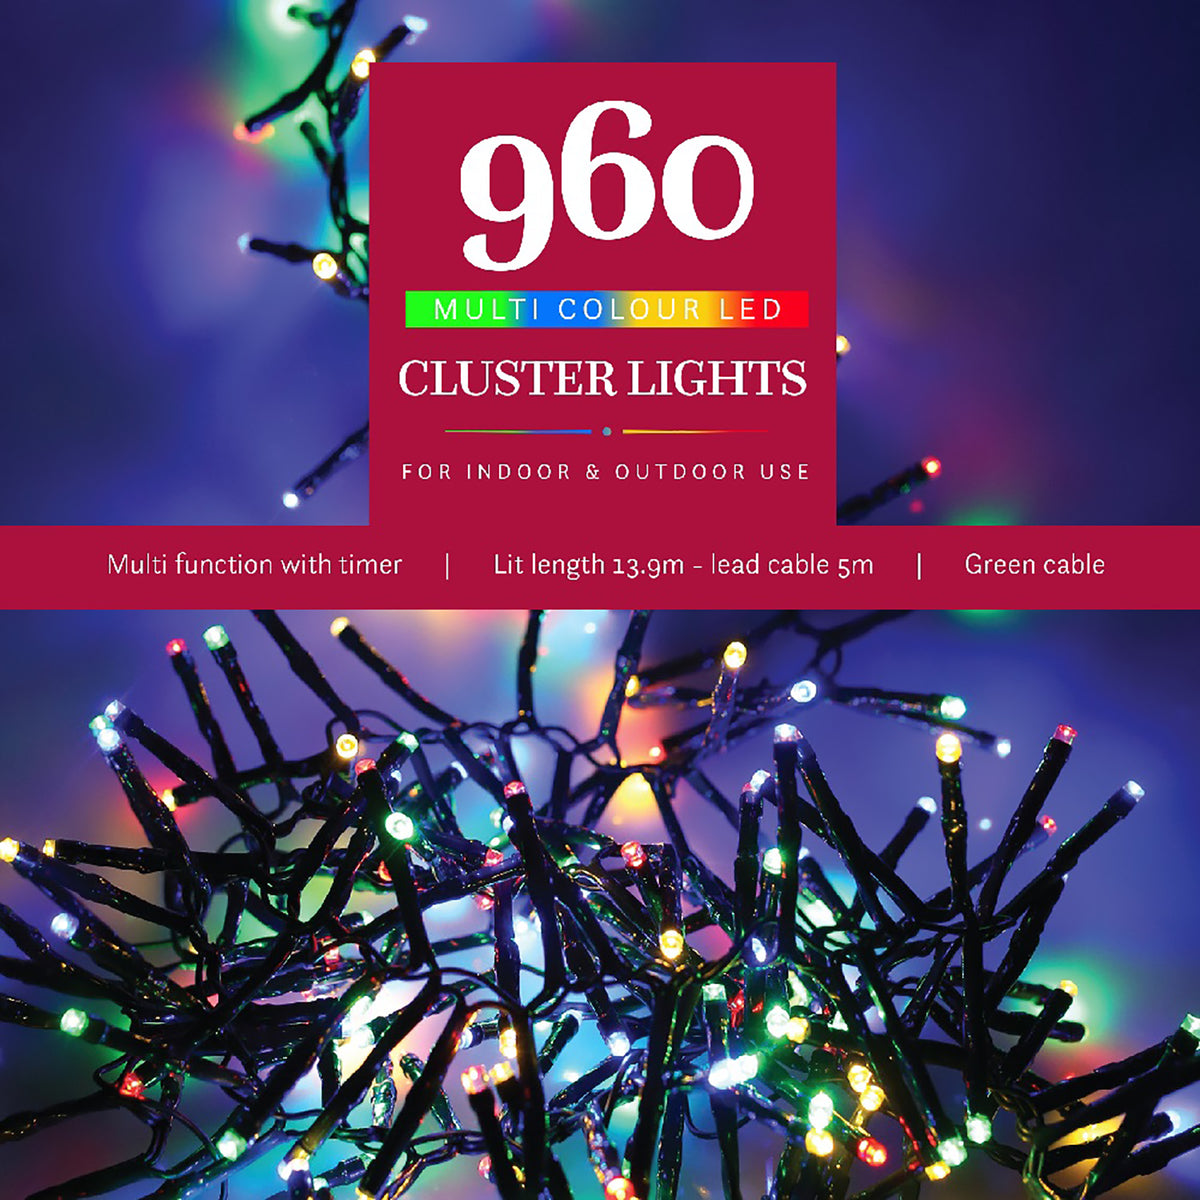 Noma Christmas 360, 480, 720, 960, 2000 Multifunction Cluster Lights with Green Cable - Multi Colour